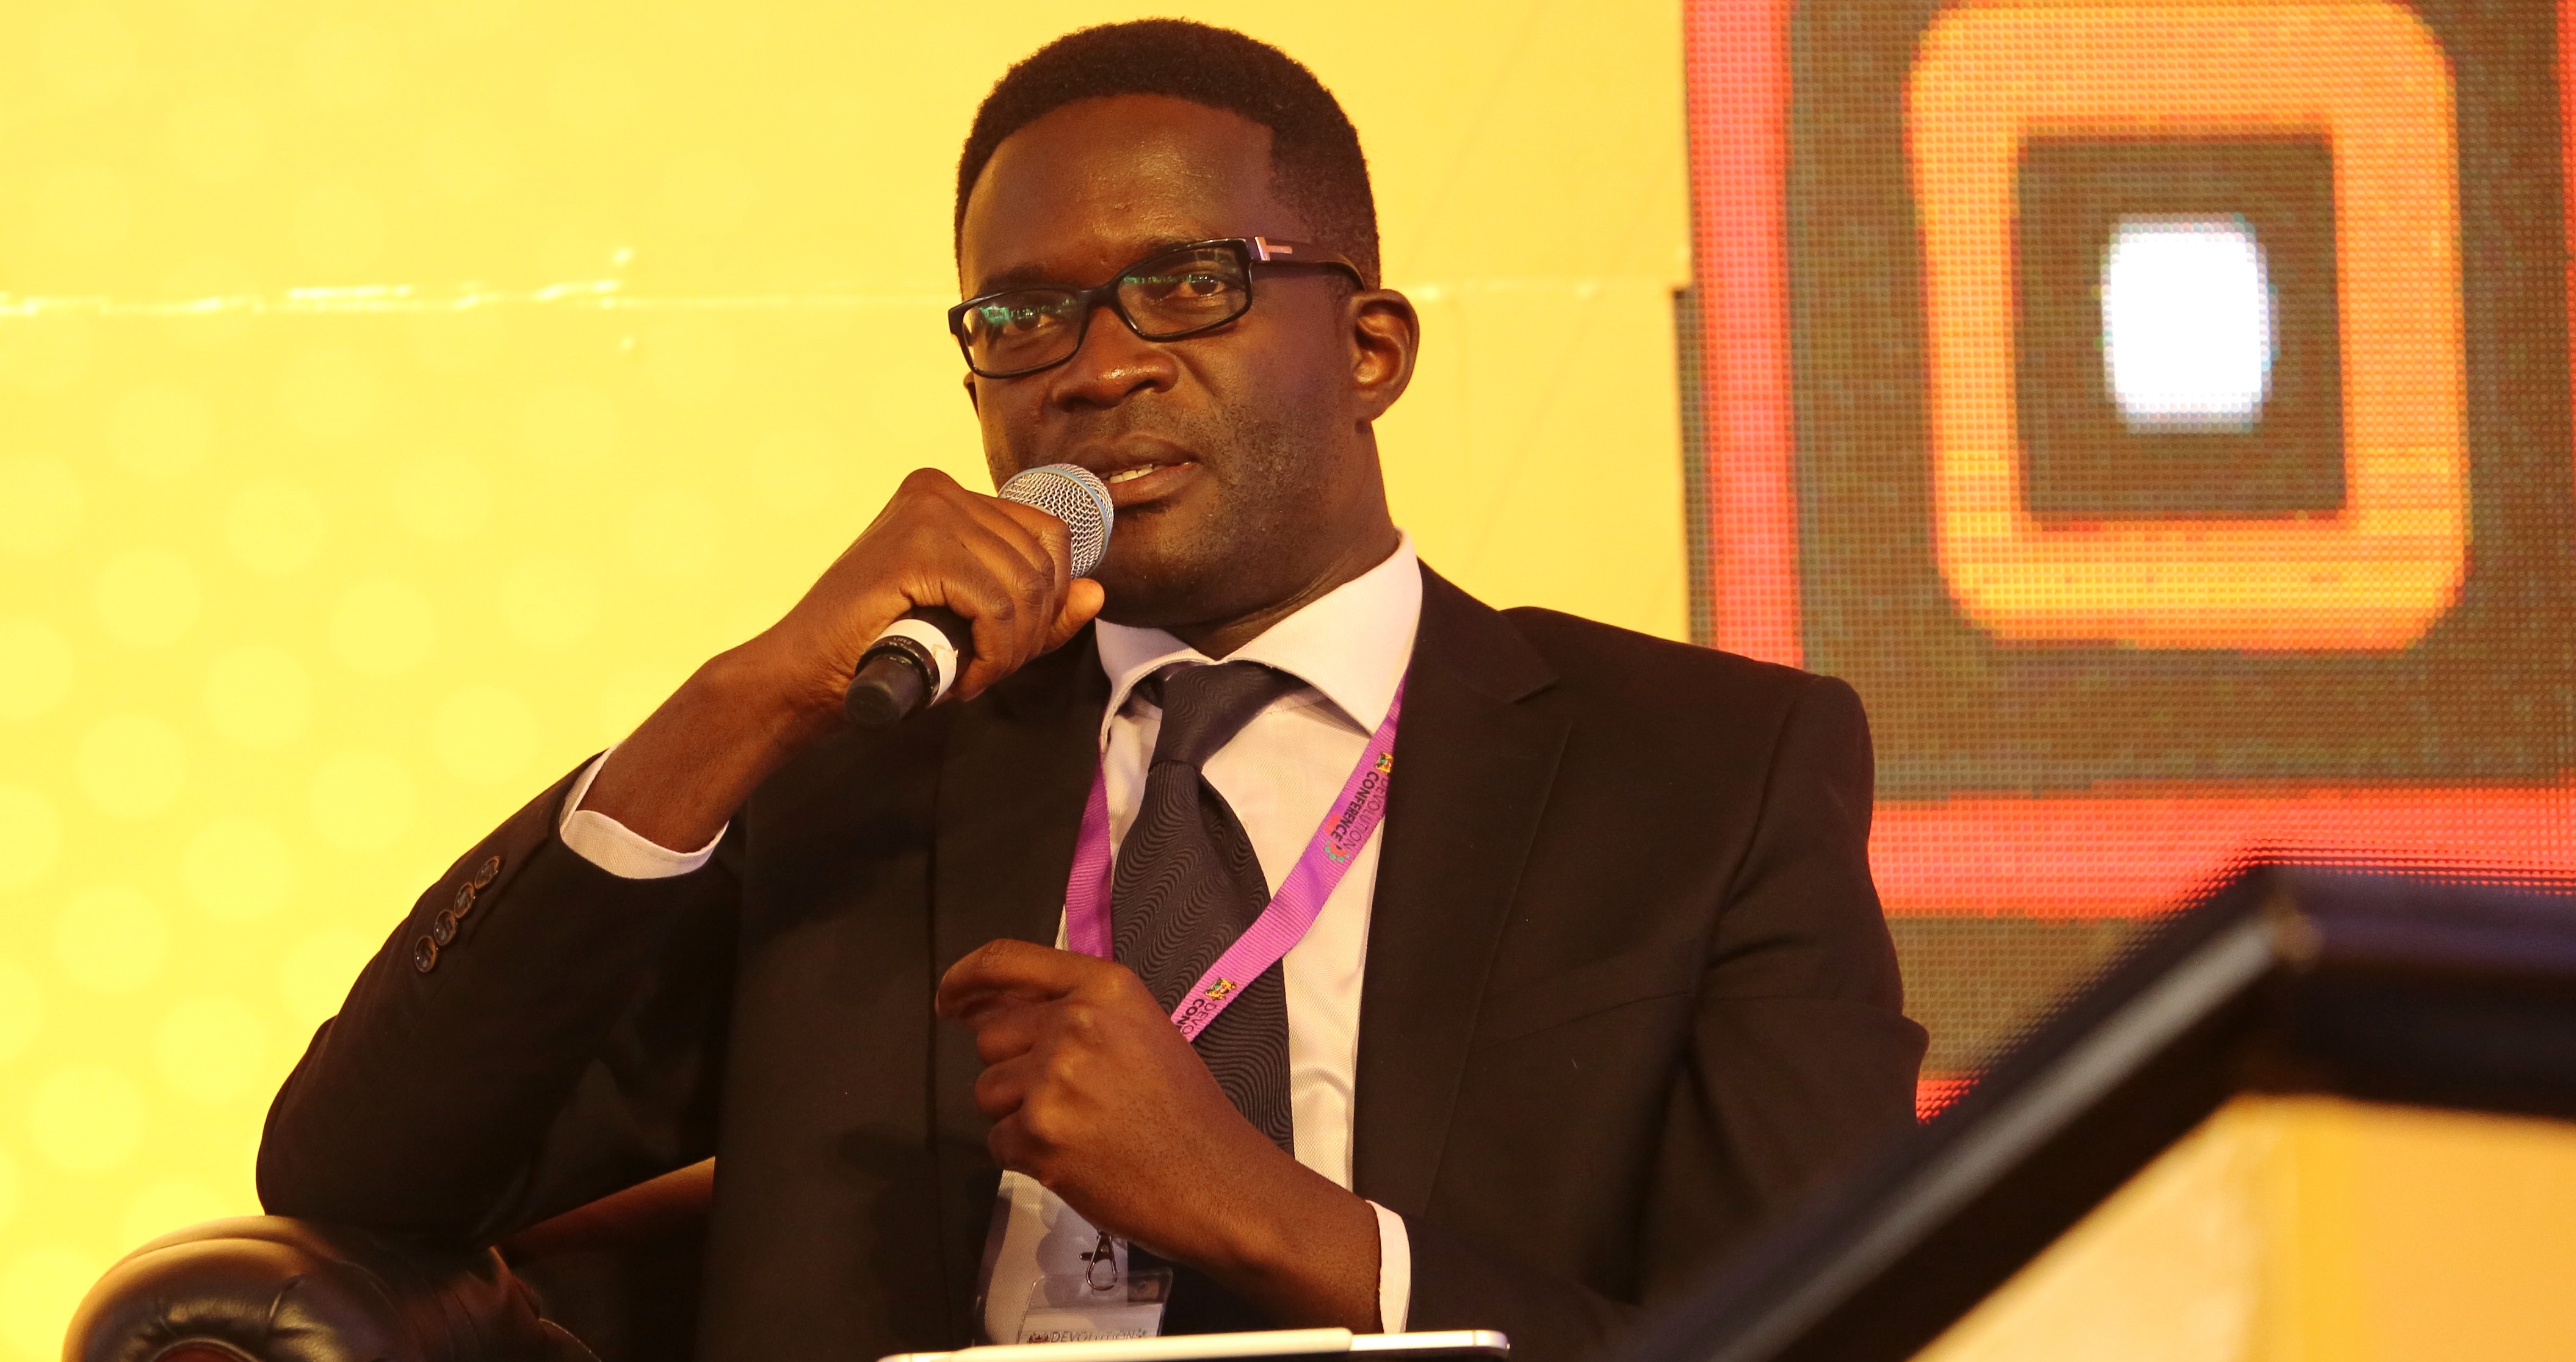 CA Director General Ezra Chiloba speaks during a panel session at the 8th Devolution Conference in Eldoret